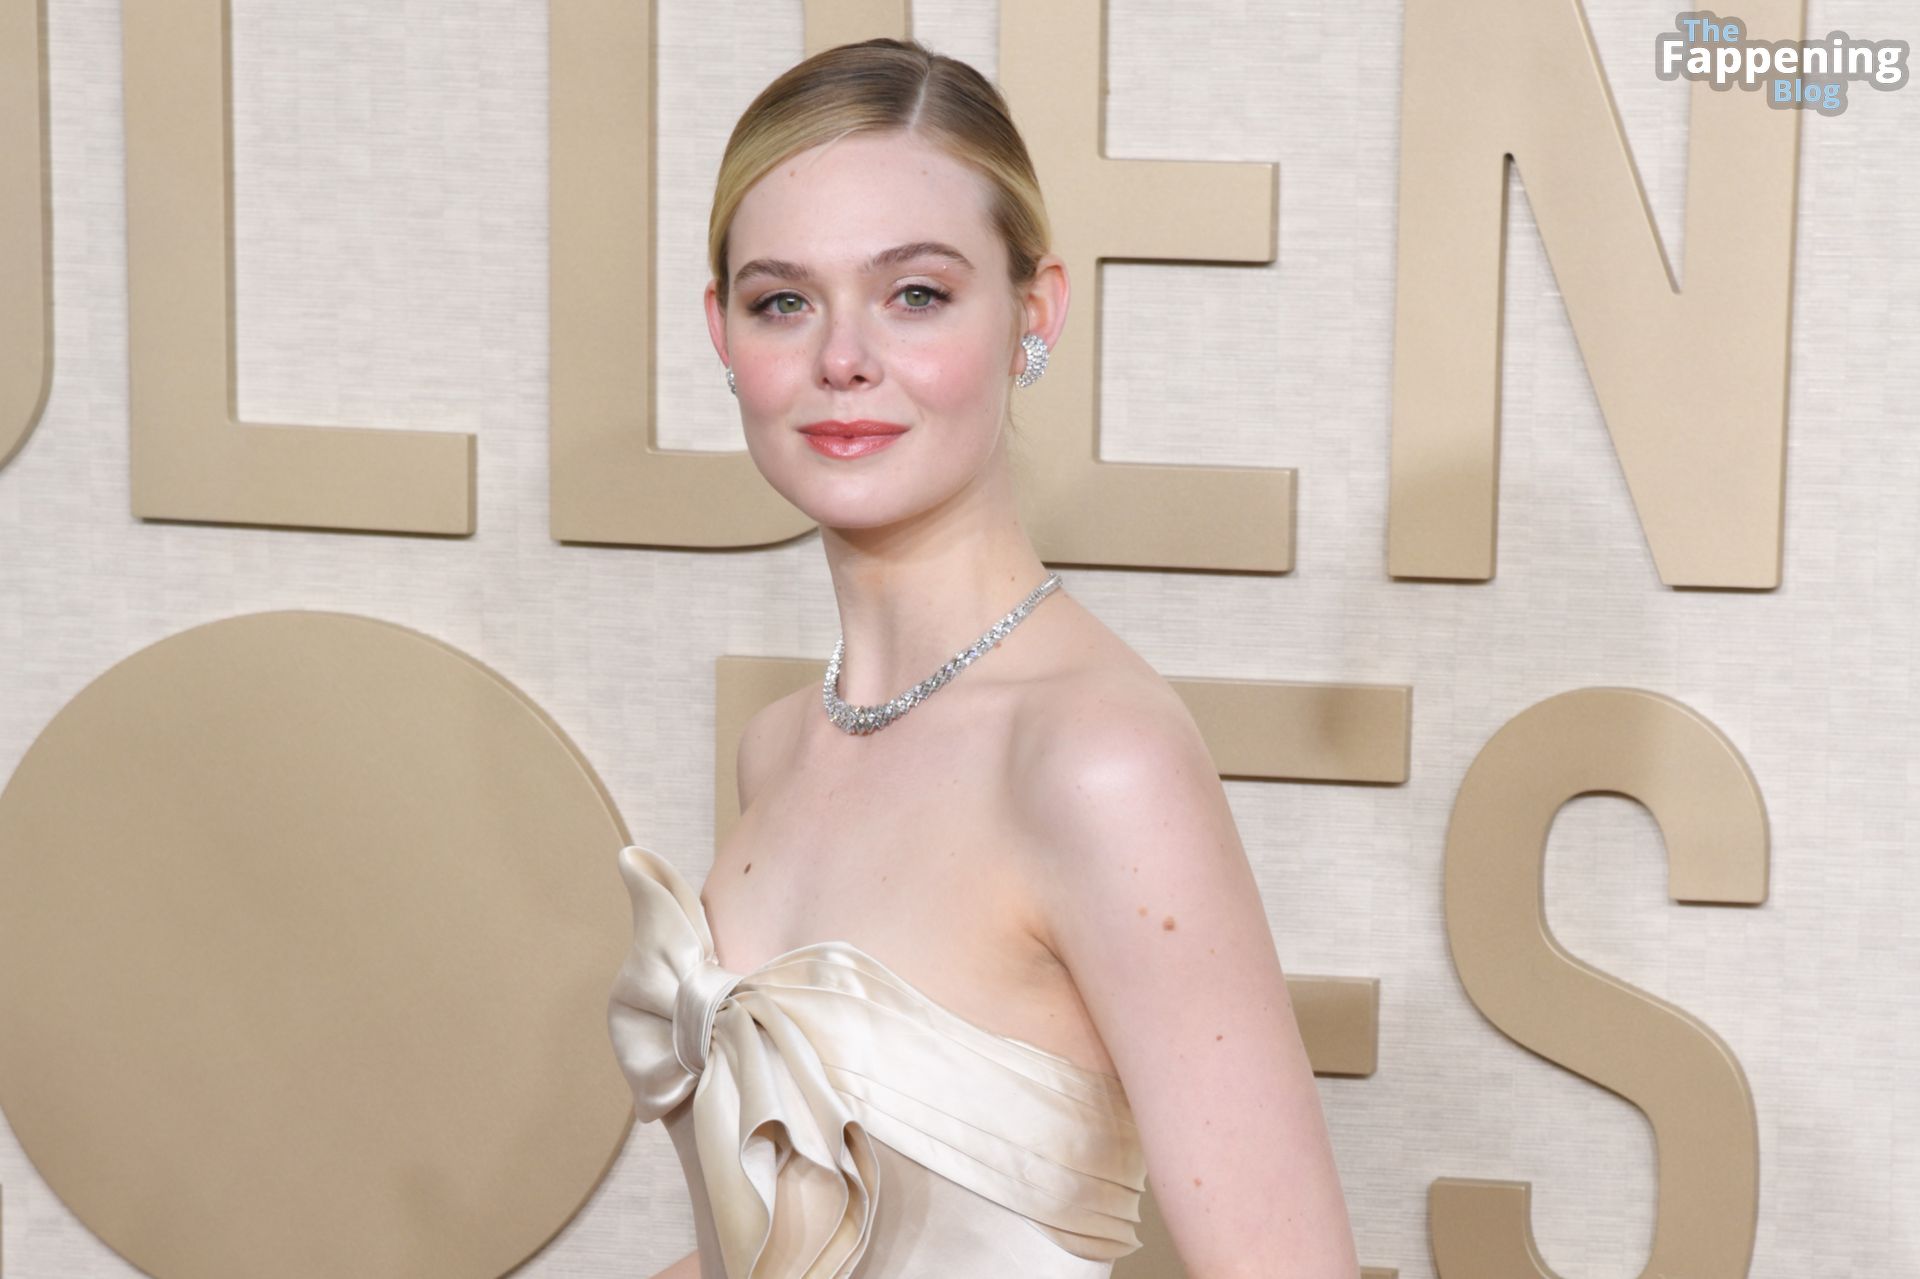 Elle-Fanning-Sexy-7-The-Fappening-Blog.jpg